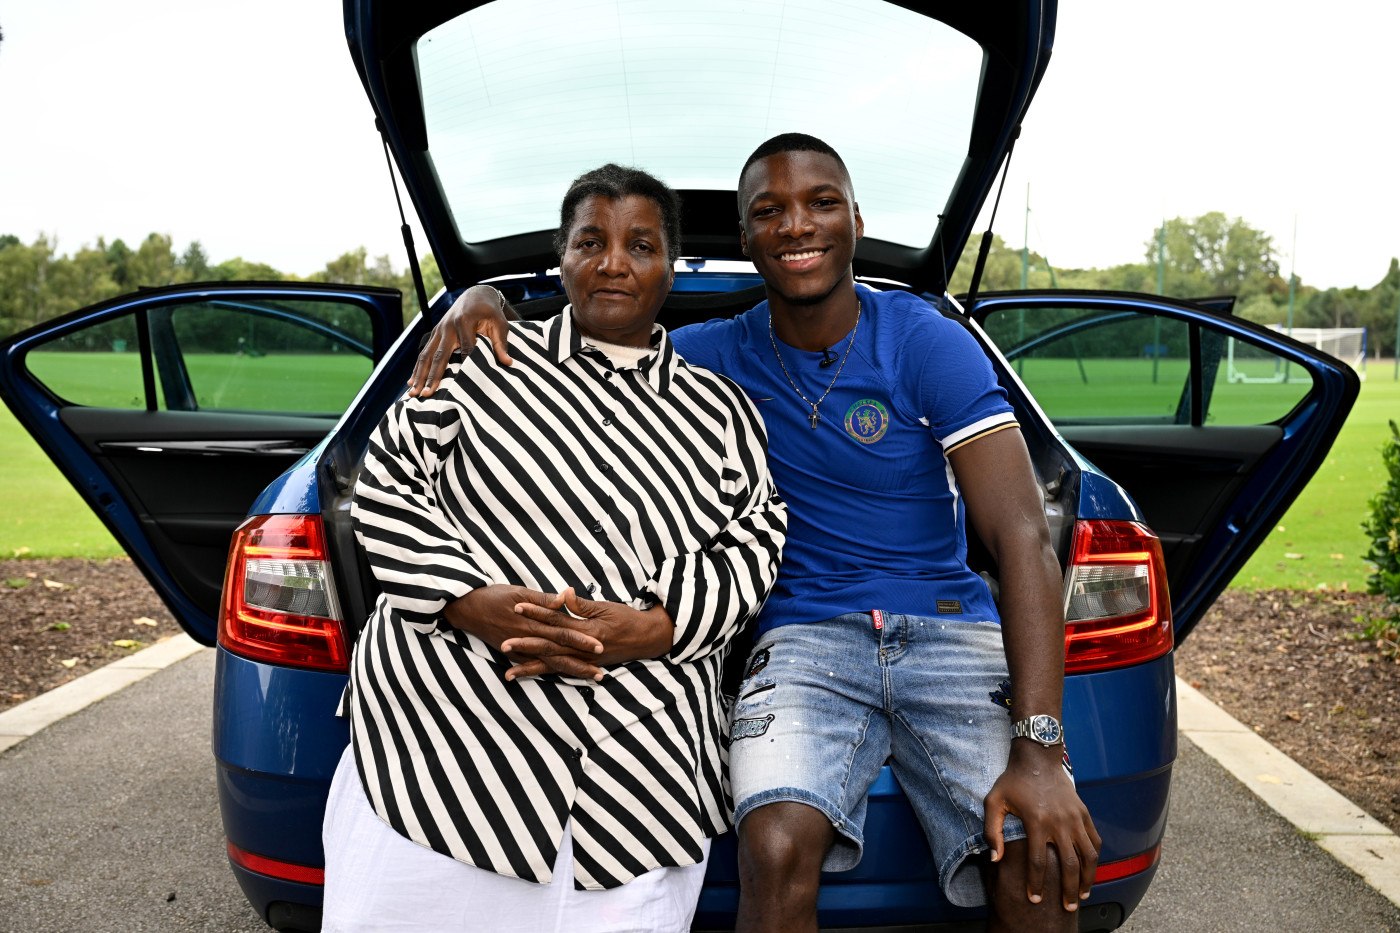 Moises and his Mum Carmen at Cobham today